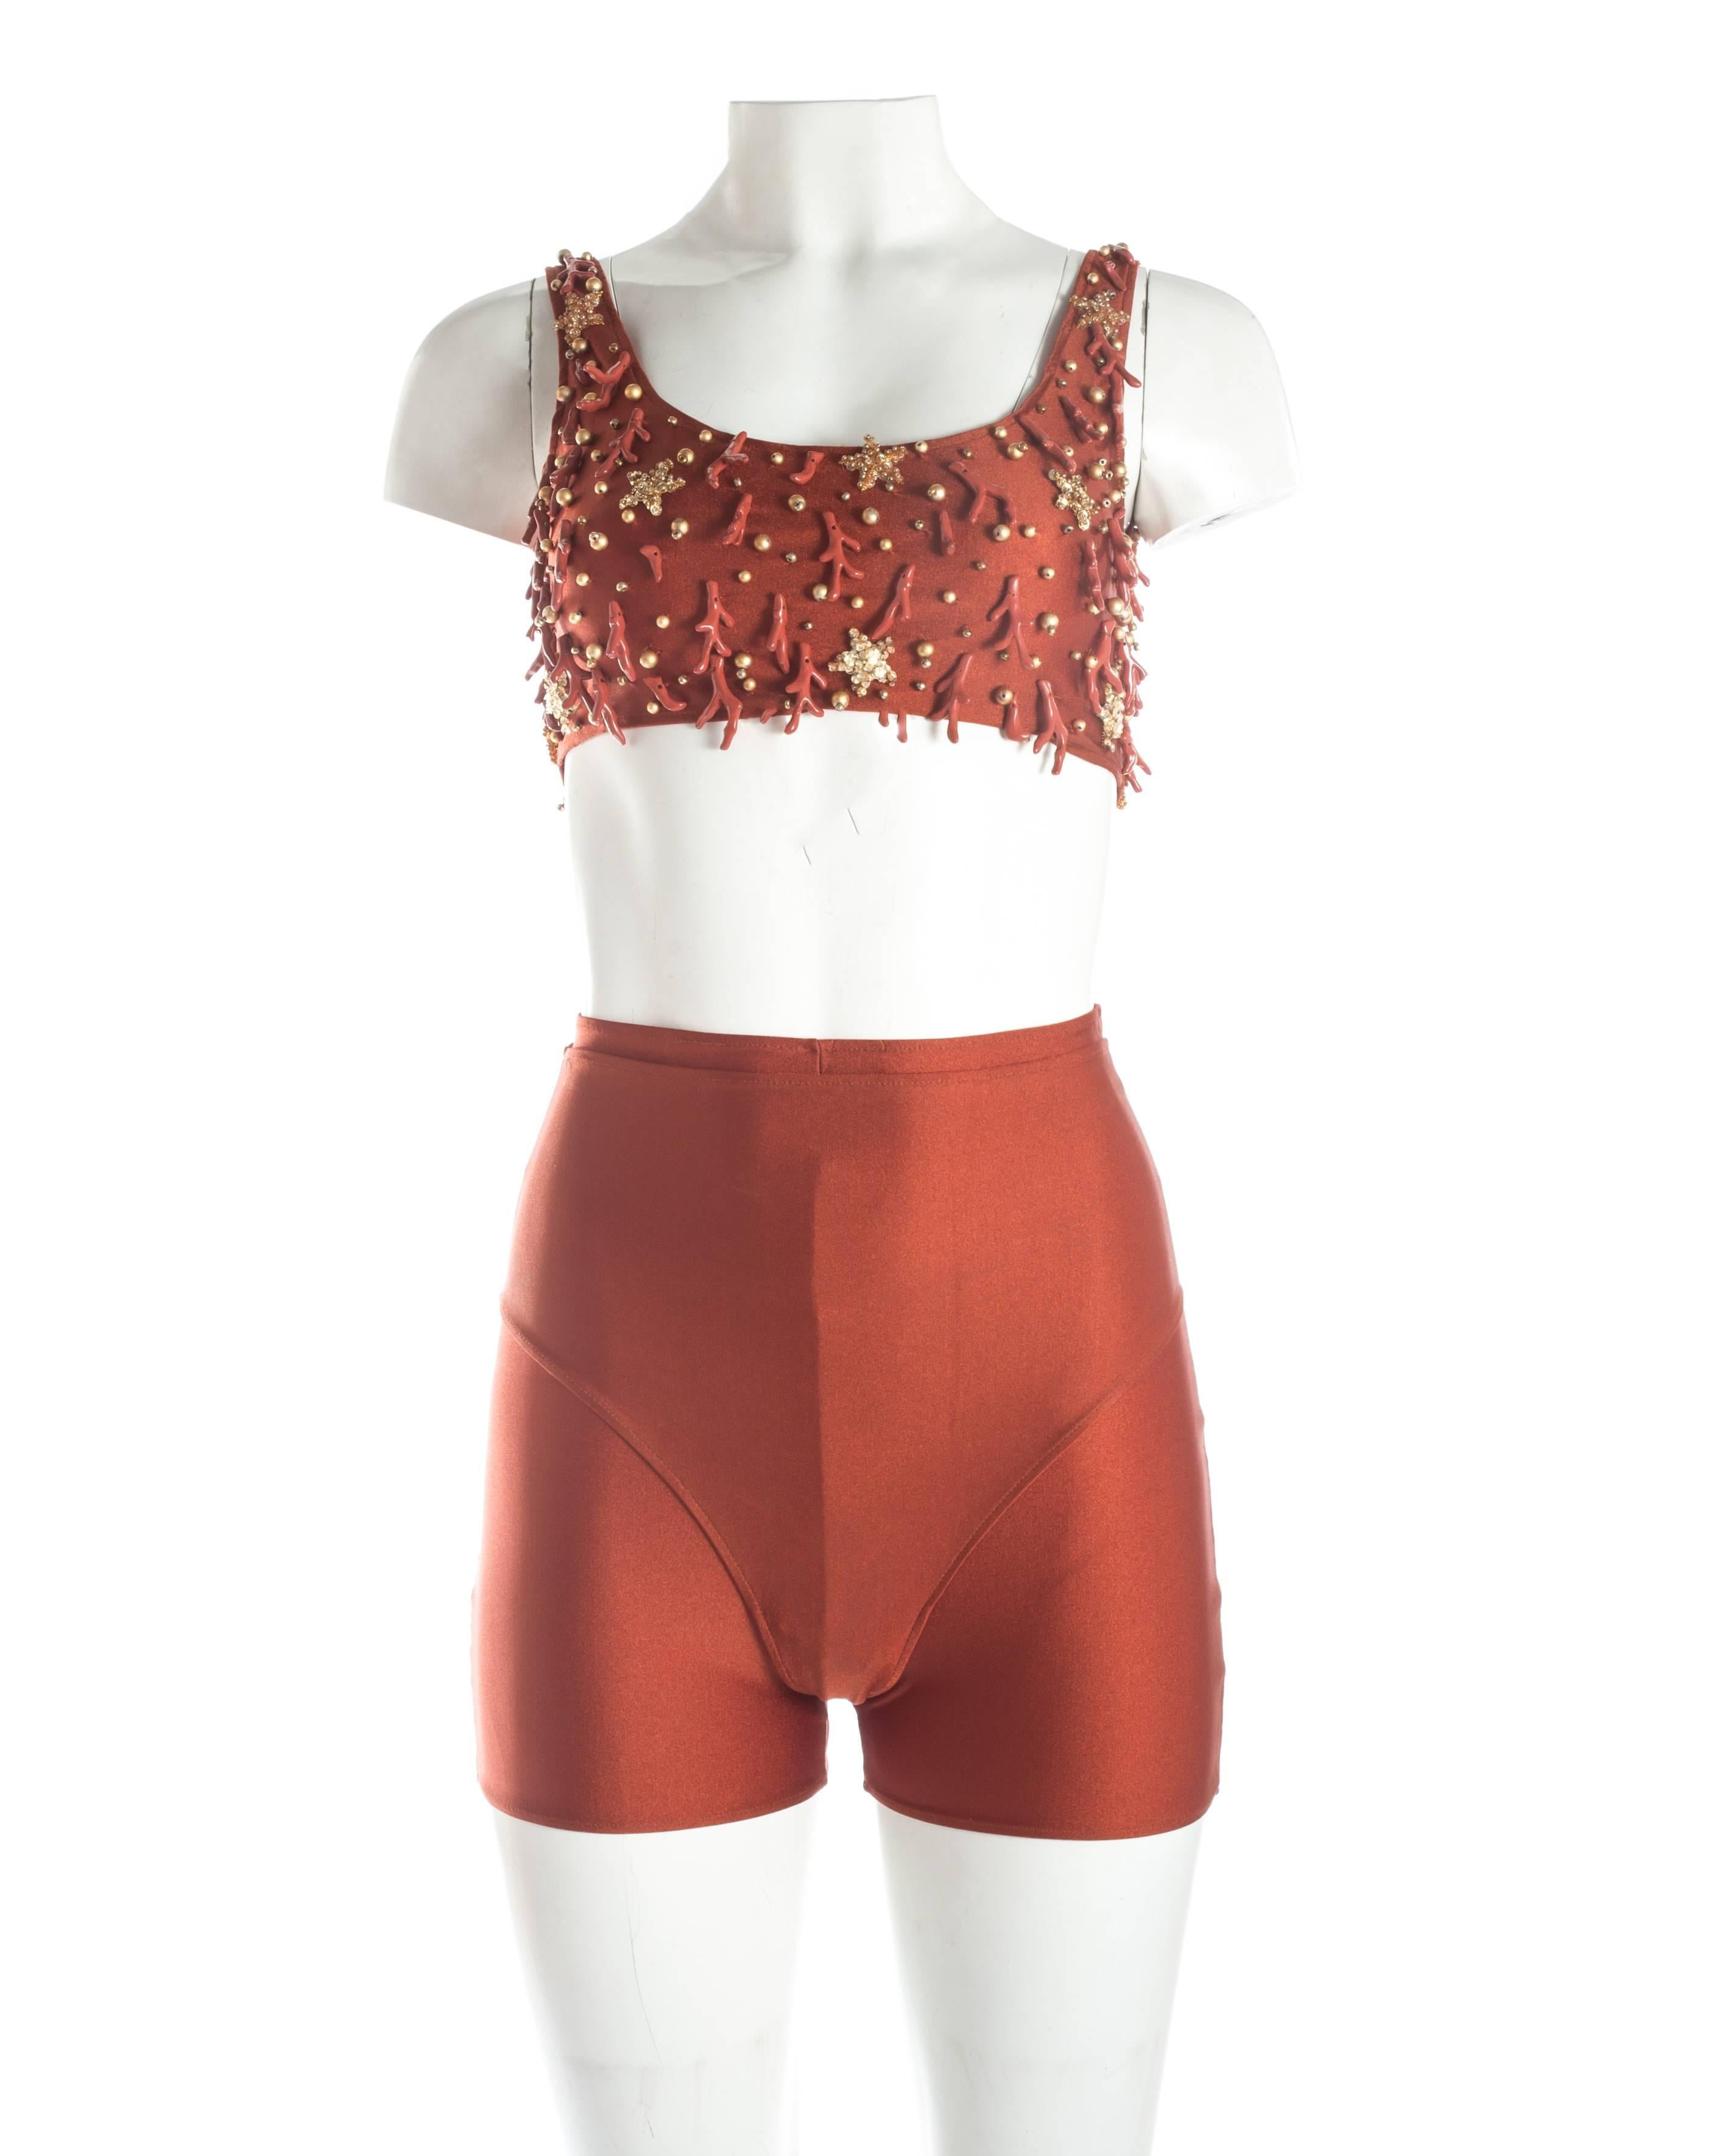 -  Decorative coral shaped beads and gold sequin stars 
- Can be worn with high-waisted shorts or bikini bottoms or both

c. 1989-92